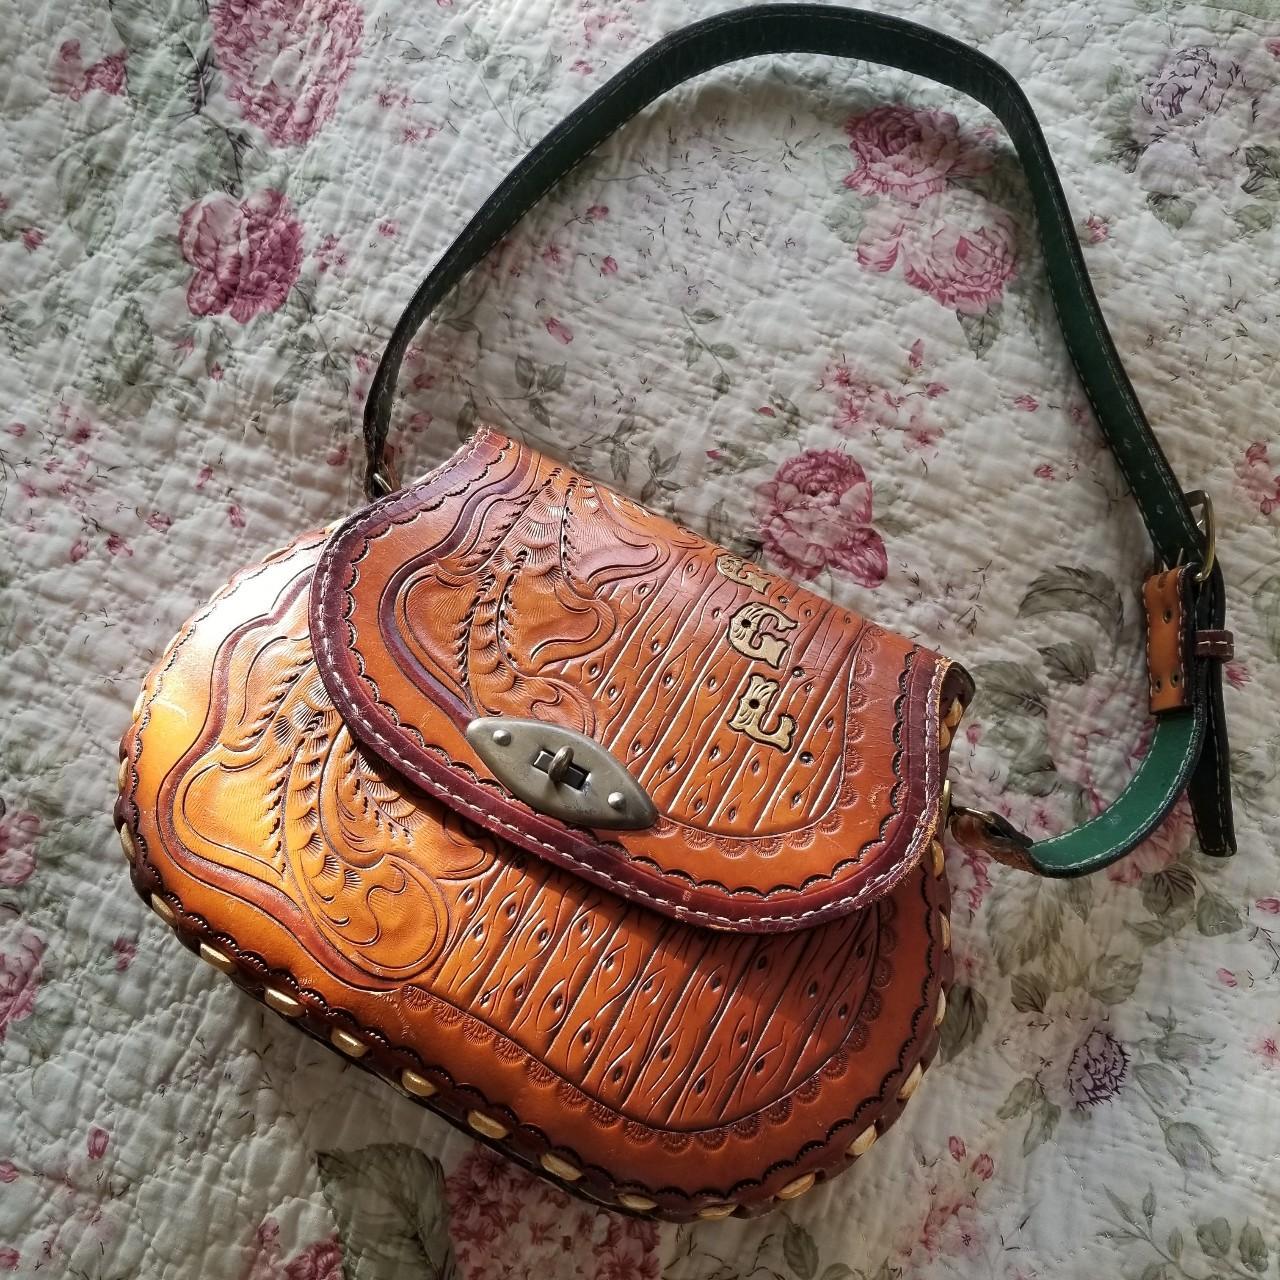 Vintage Tooled Leather Purse #3 | Armstrong Family Estate Services